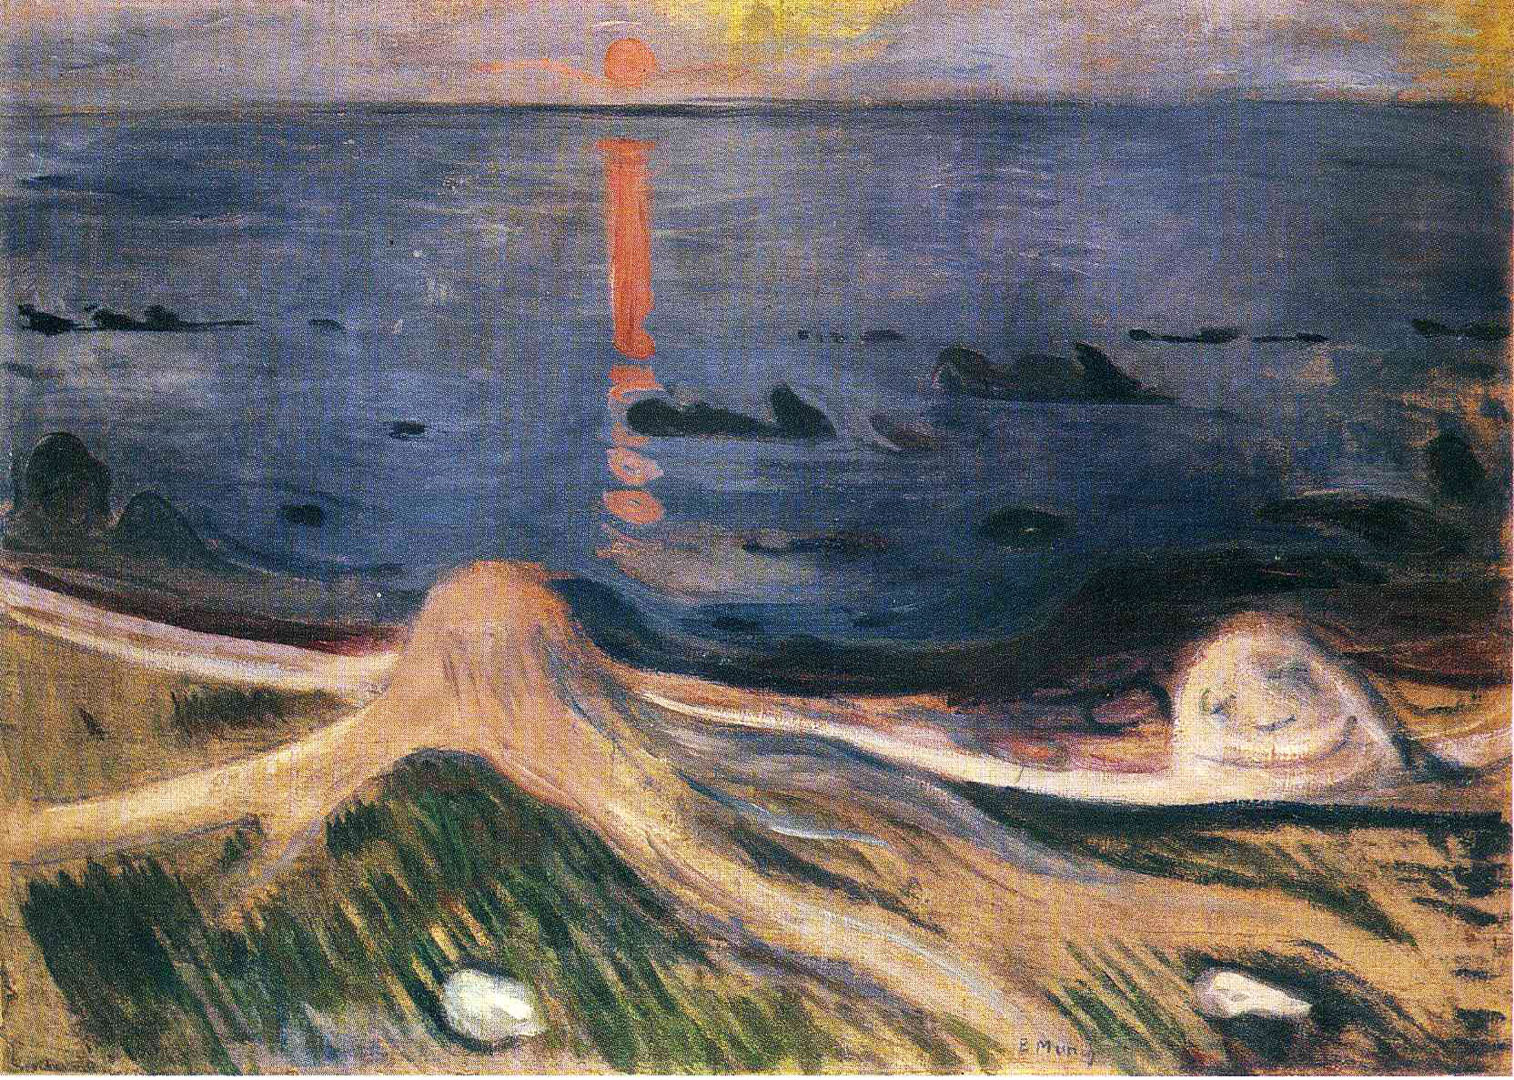 Mystery Of A Summer Night - Edvard Munch The Mystery Of A Summer Night - HD Wallpaper 